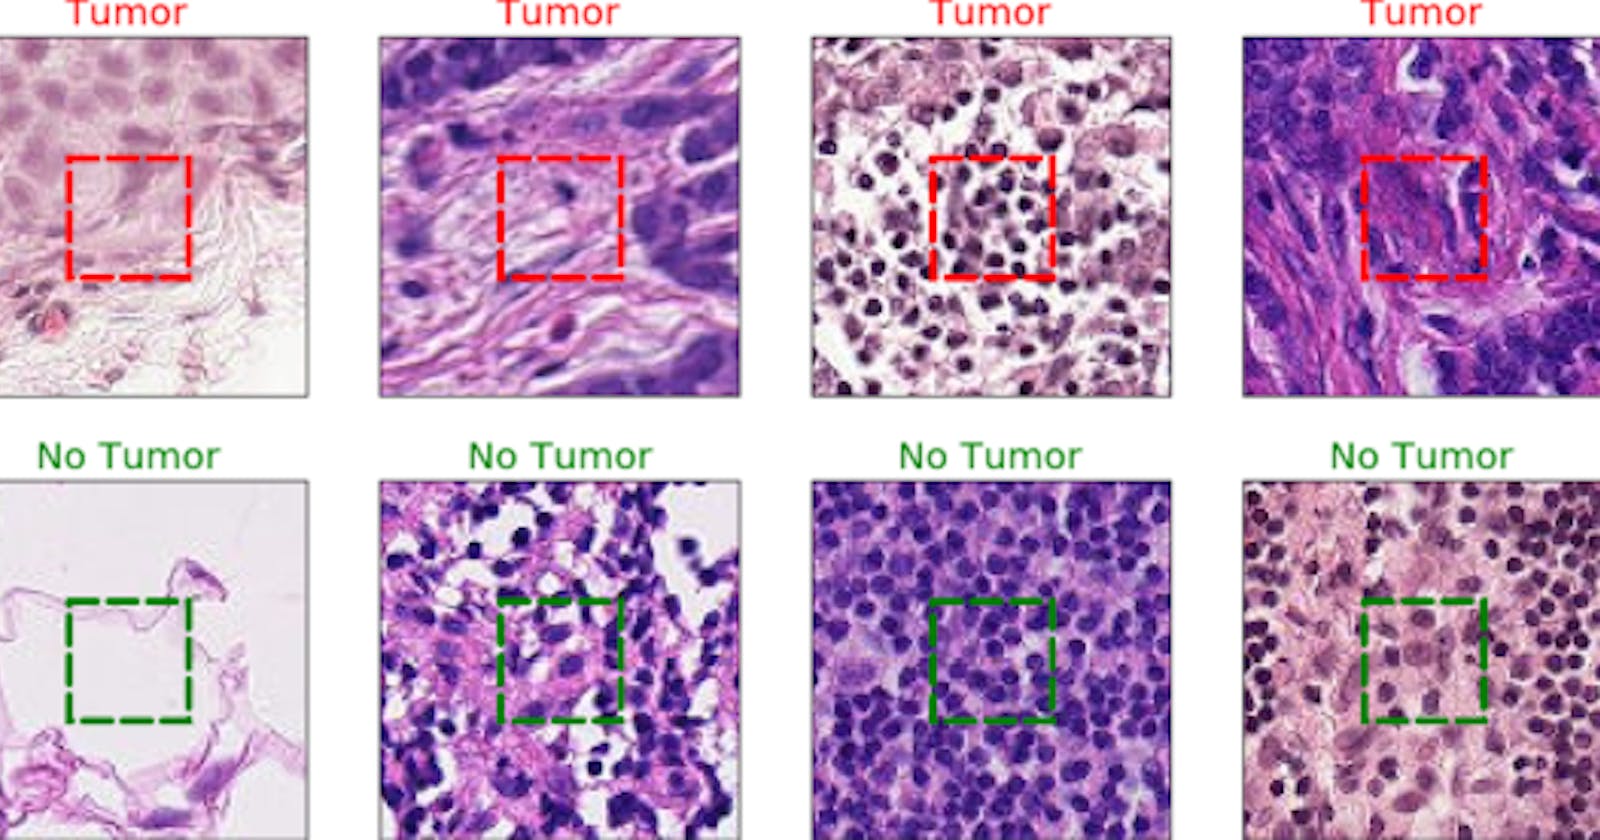 Convolutional Neural Network for Detecting Cancer Tumors in Microscopic Images